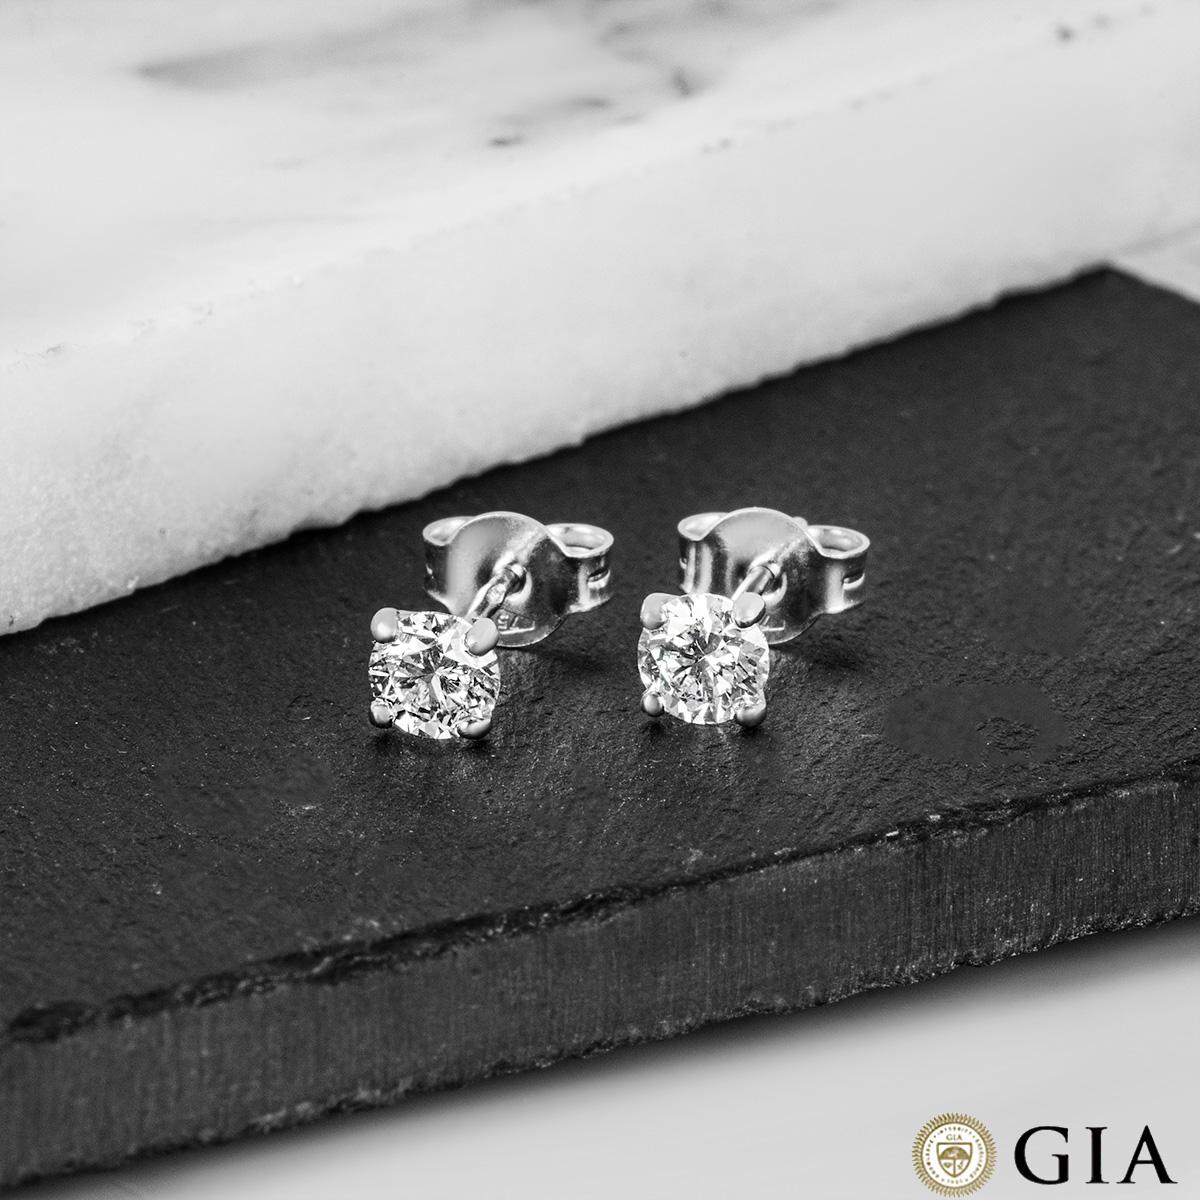 GIA Certified White Gold Round Brilliant Cut Diamond Earrings 0.80 Carat TDW For Sale 3